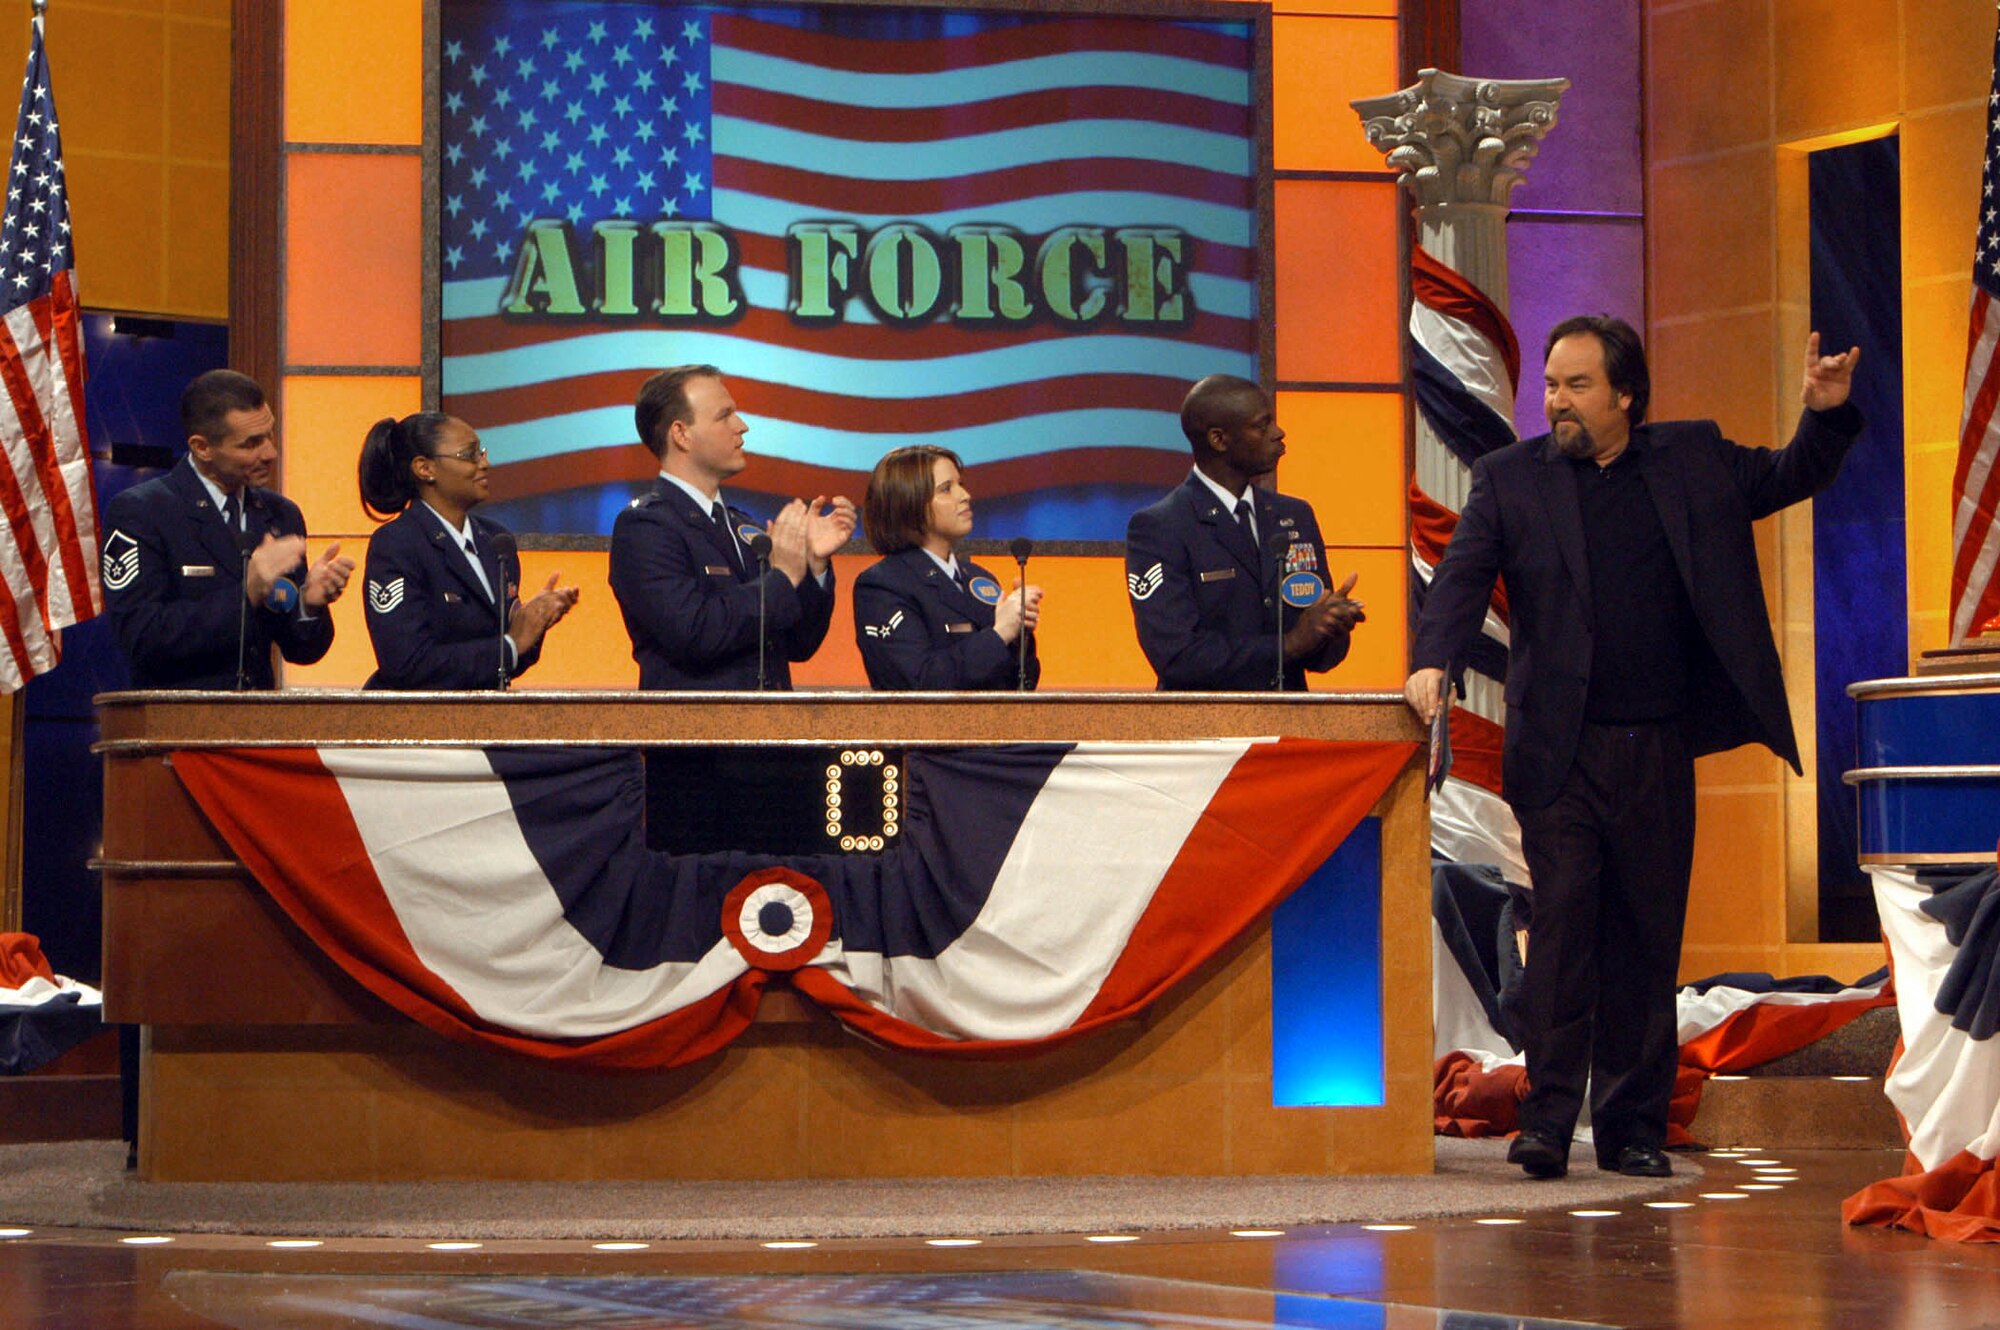 LOS ANGELES -- (From left) Master Sgt. Jim Gantar, Tech. Sgt. Daphne Soto, Capt. Robert Wagner, Airman 1st Class Holly Frost, Staff Sgt. Teddy Deshazier and host Richard Karn tape an episode of "Family Feud" here Jan. 31.  (U.S. Air Force photo by Airman 1st Class Matthew Dillier)